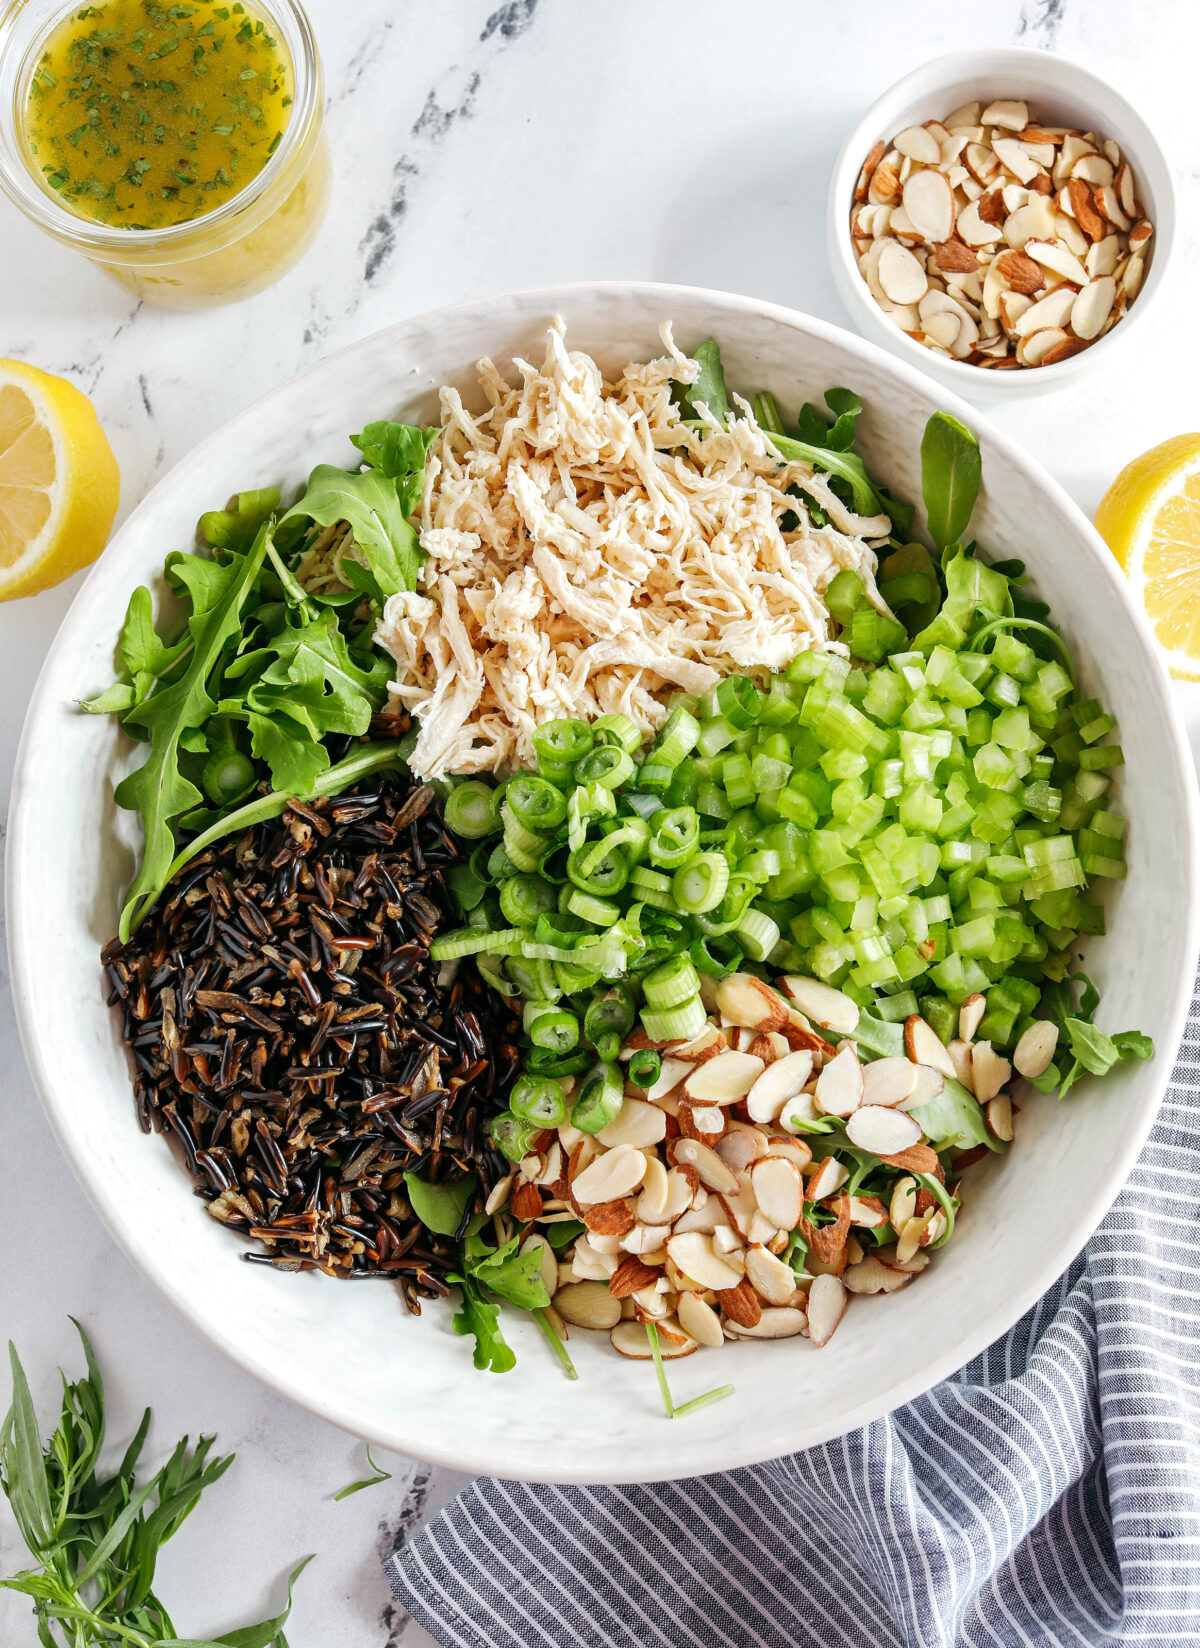 Hearty and delicious Wild Rice Chicken Salad made with leafy arugula, warm wild rice, shredded chicken, sliced almonds, and green onions all tossed with a bright lemon tarragon vinaigrette!